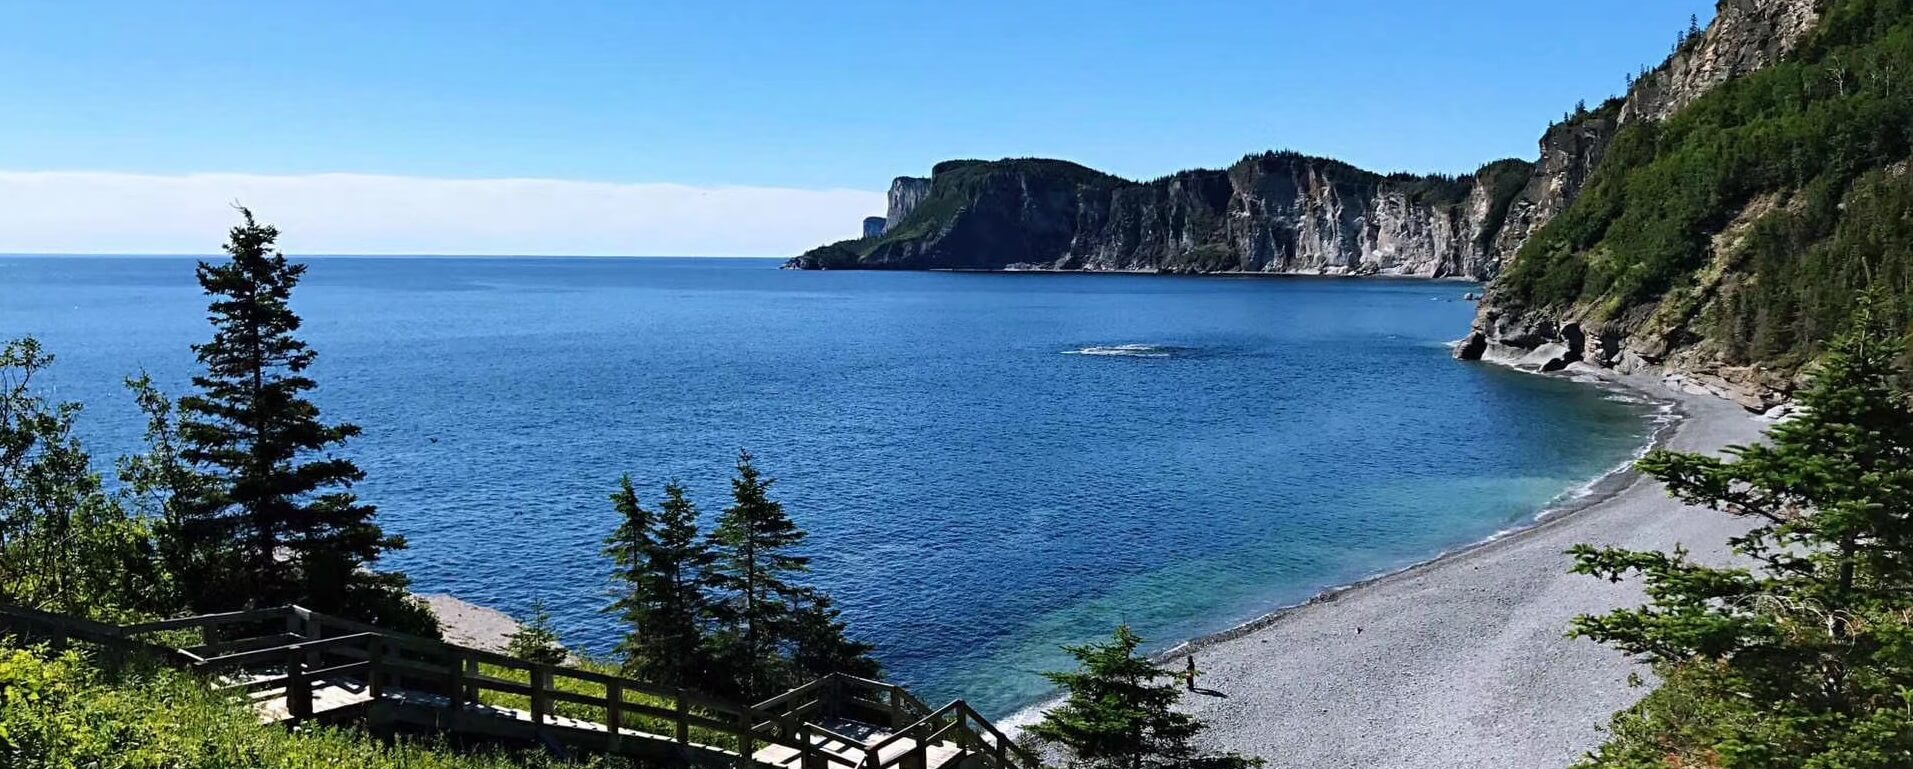 bus tours from montreal to gaspesie